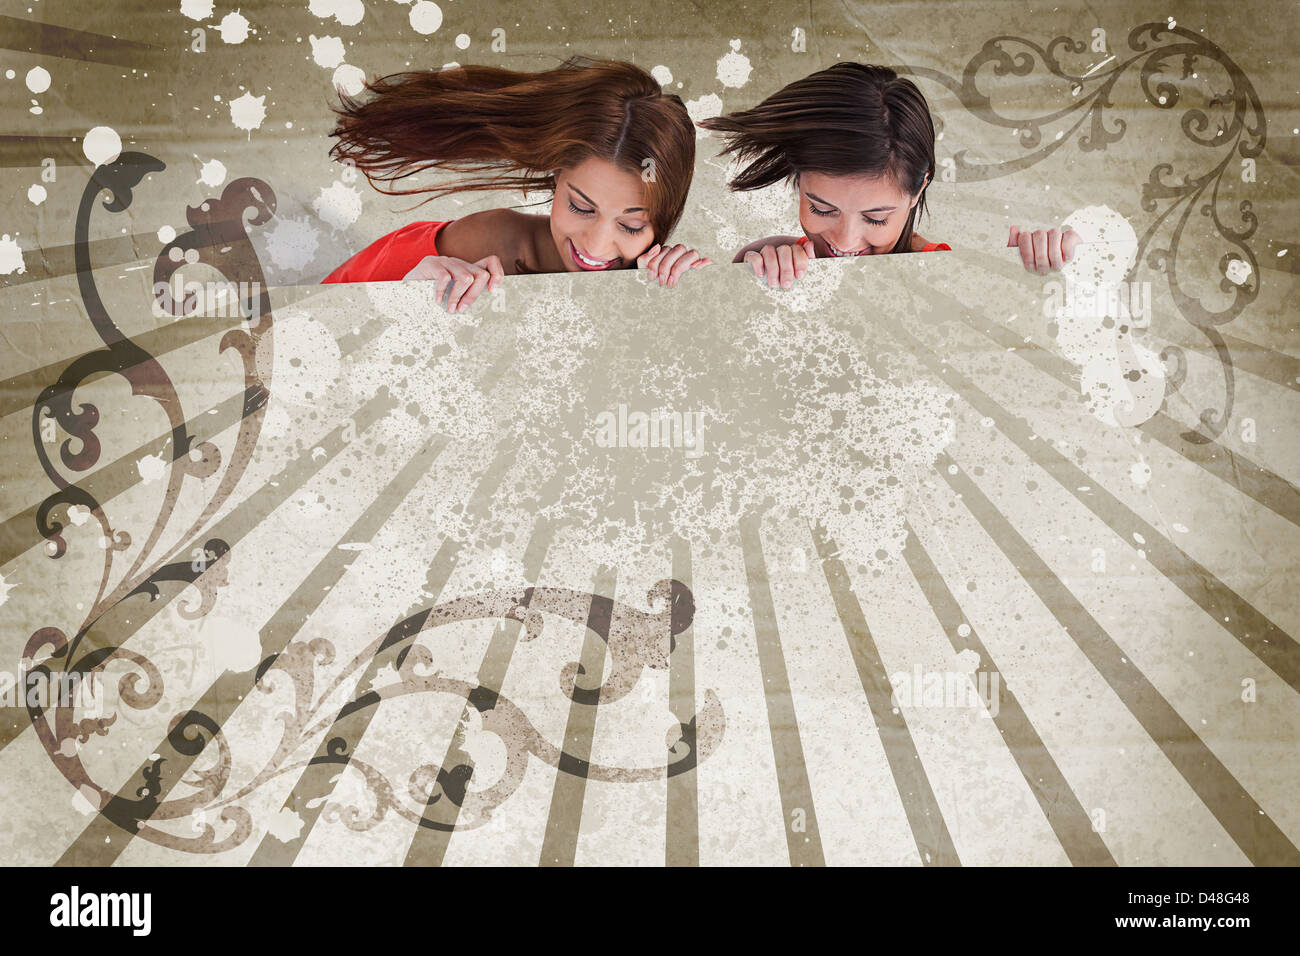 Girls looking down on copy space on art deco style background Stock Photo